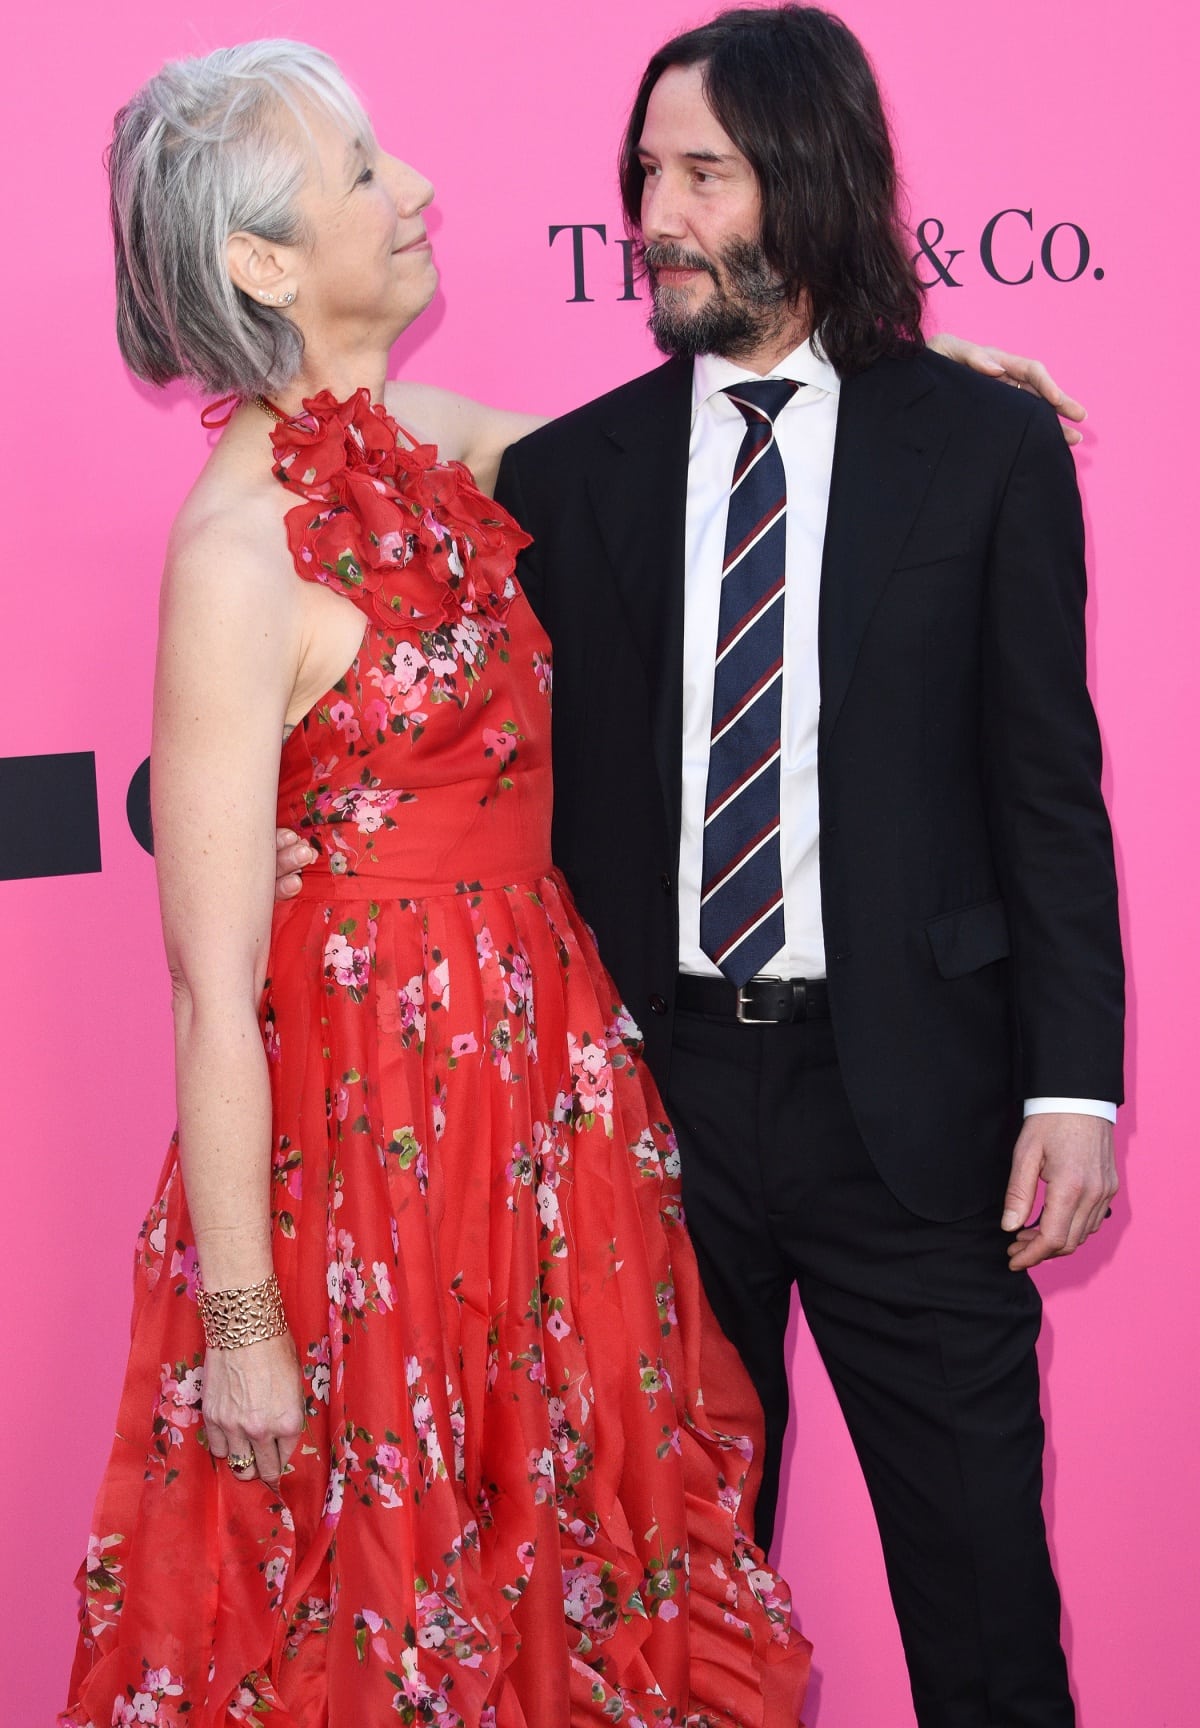 Longtime couple Alexandra Grant and Keanu Reeves returned to this year’s MOCA Gala to show their support for the arts and their love for each other